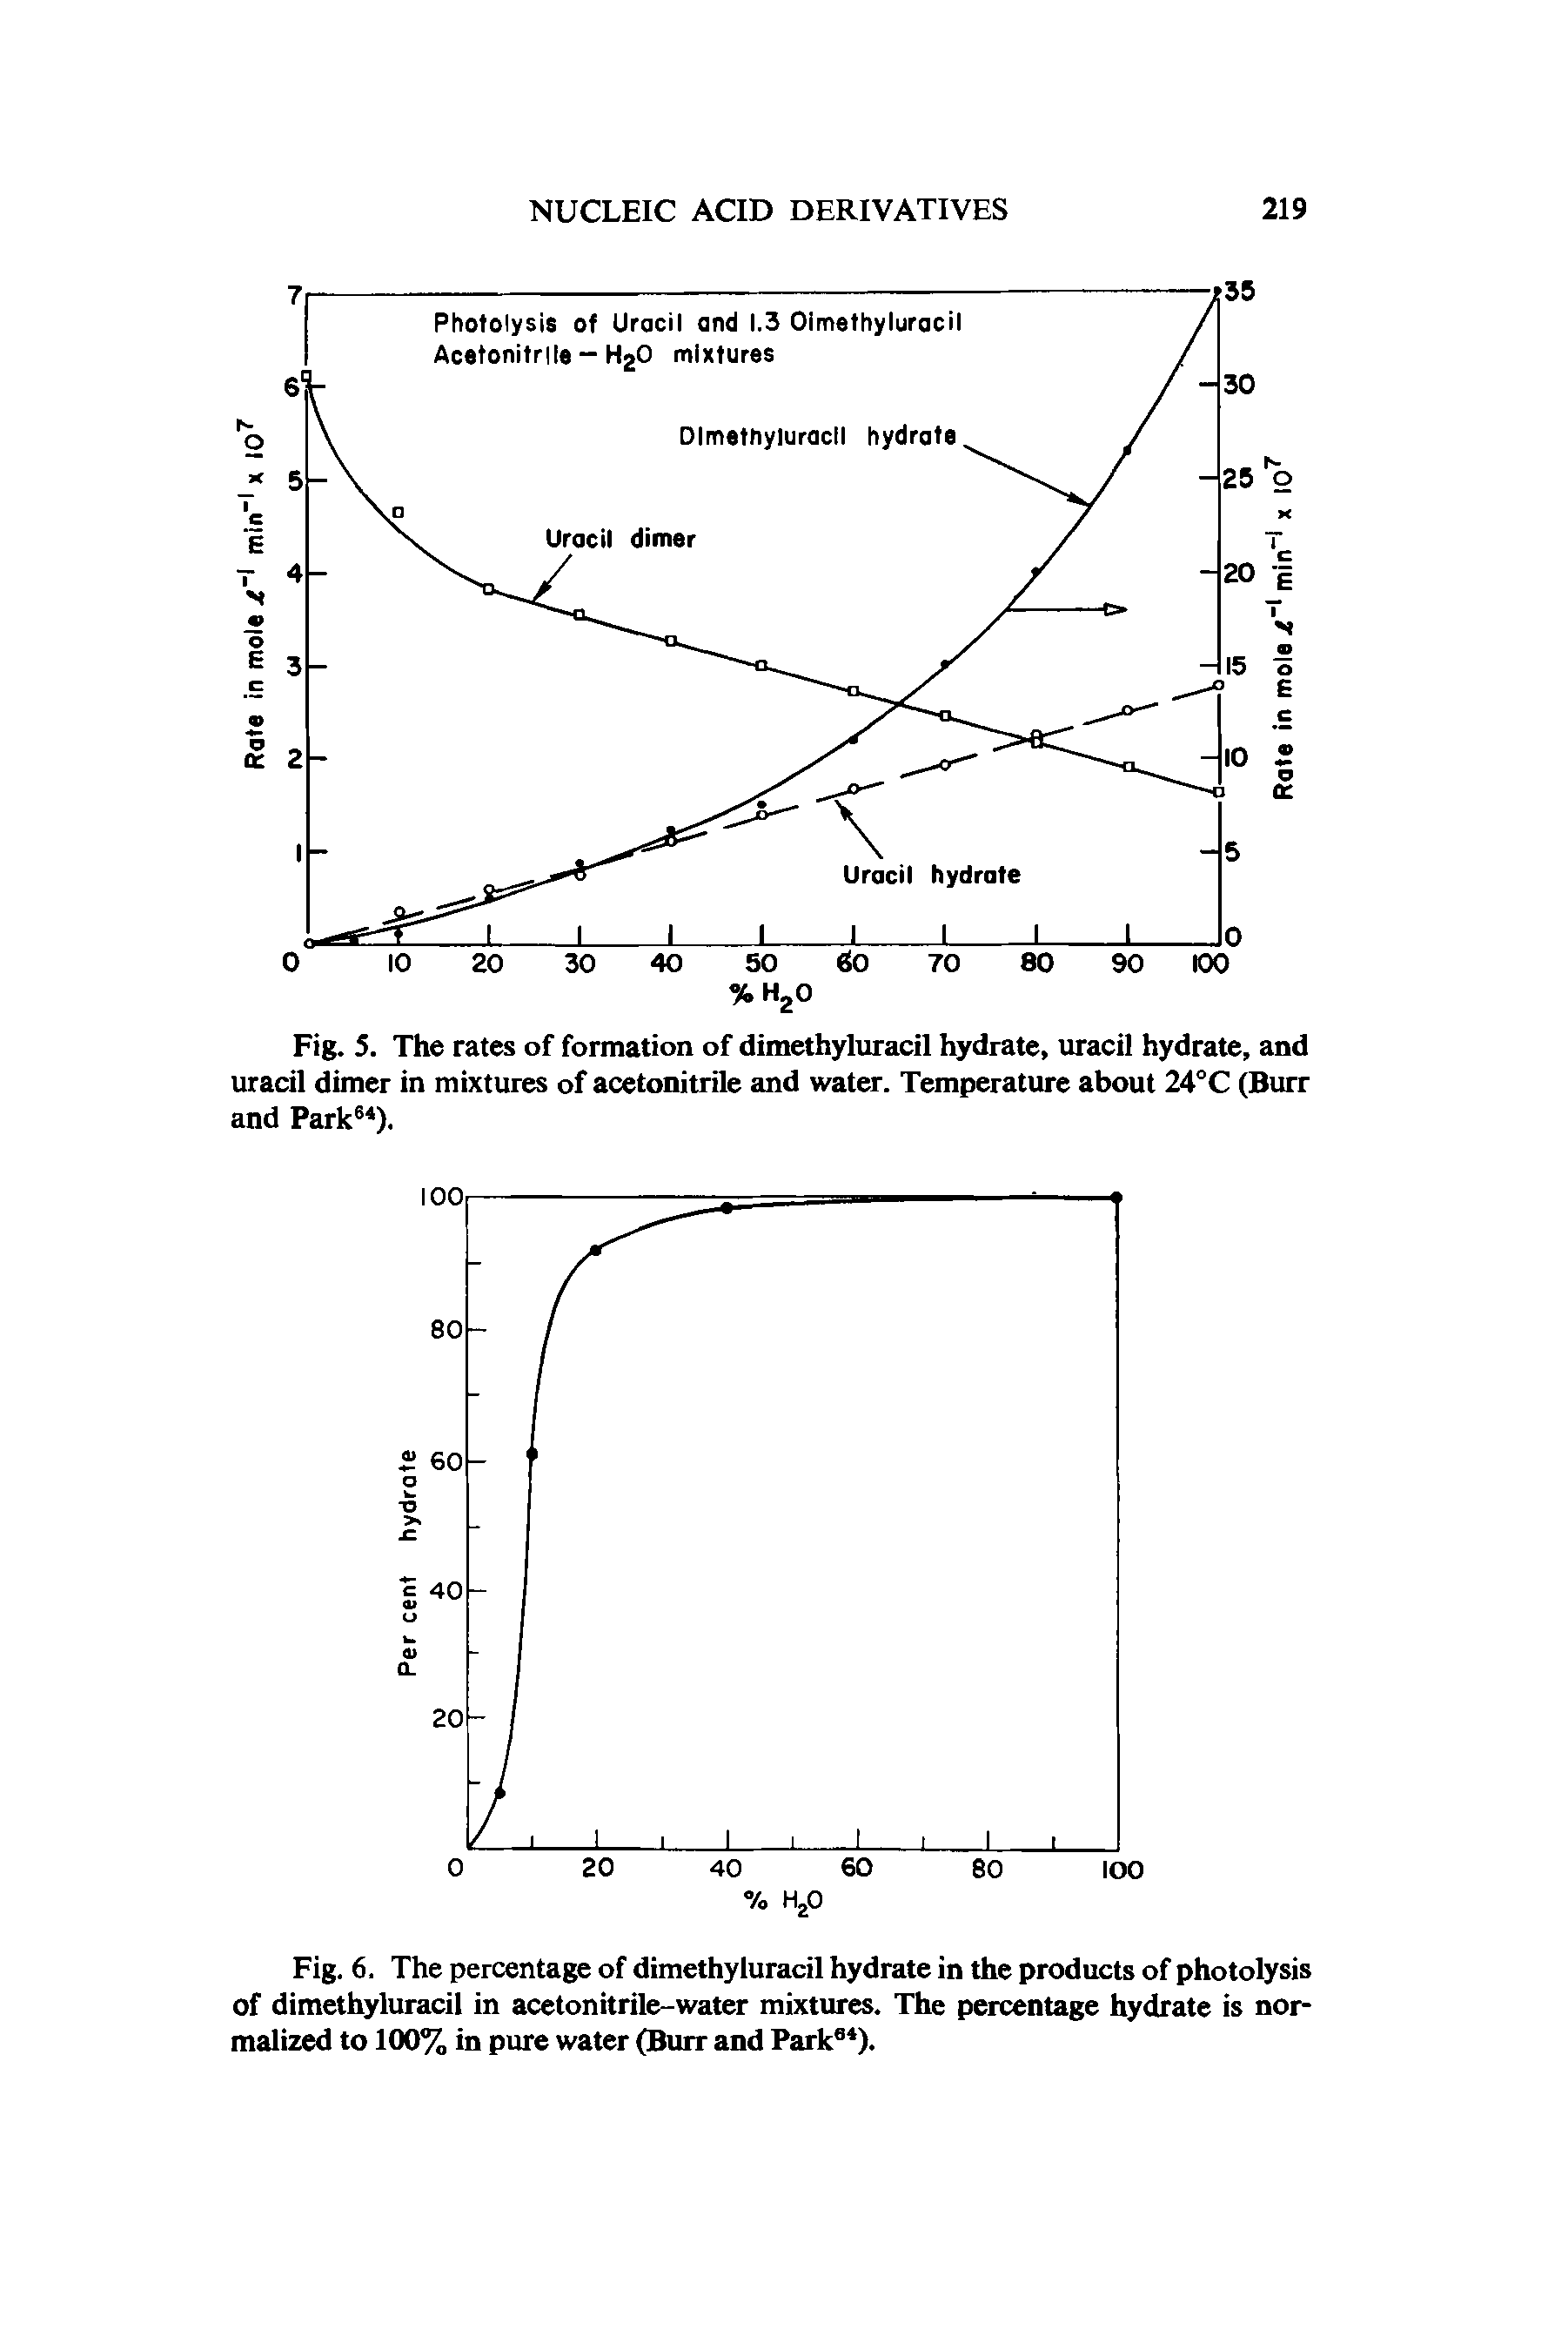 Fig. 5. The rates of formation of dimethyluracil hydrate, uracil hydrate, and uracil dimer in mixtures of acetonitrile and water. Temperature about 24°C (Burr and Park64).